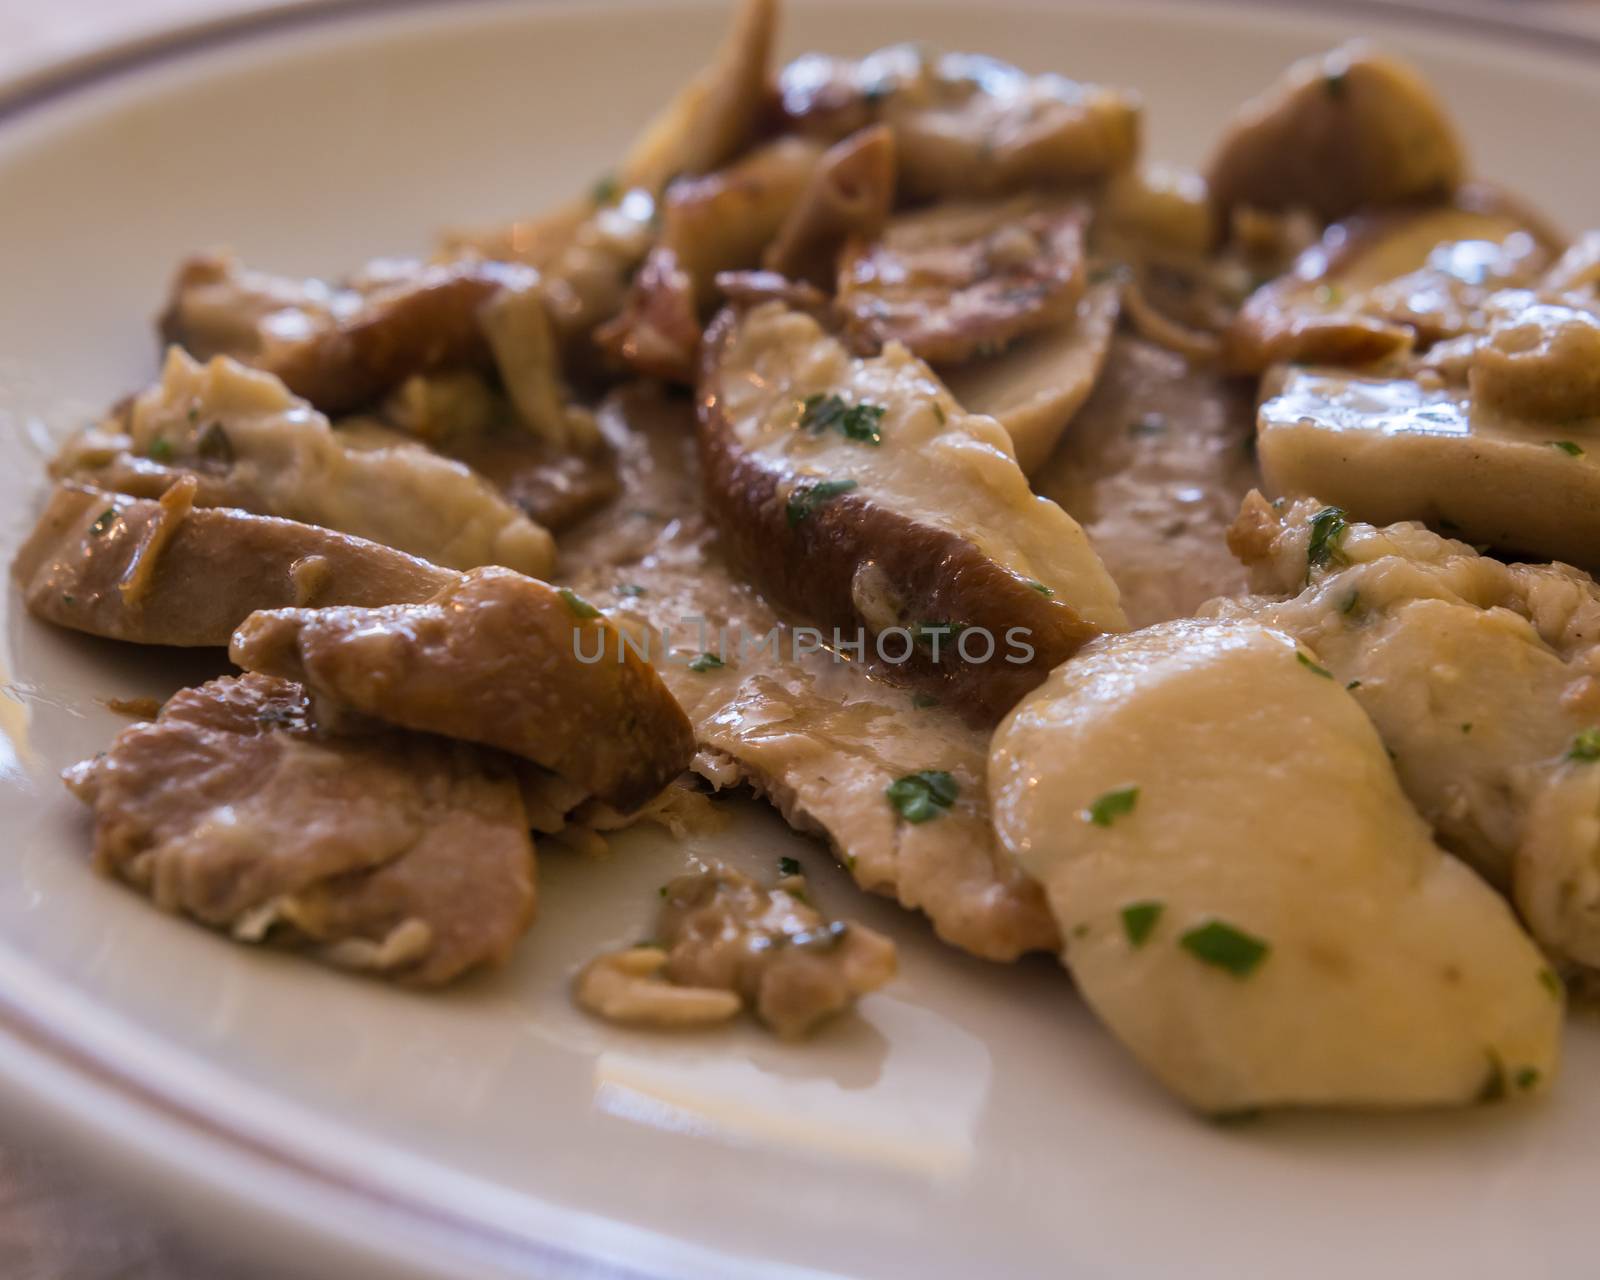 Cutlet with mushrooms porcini by Robertobinetti70